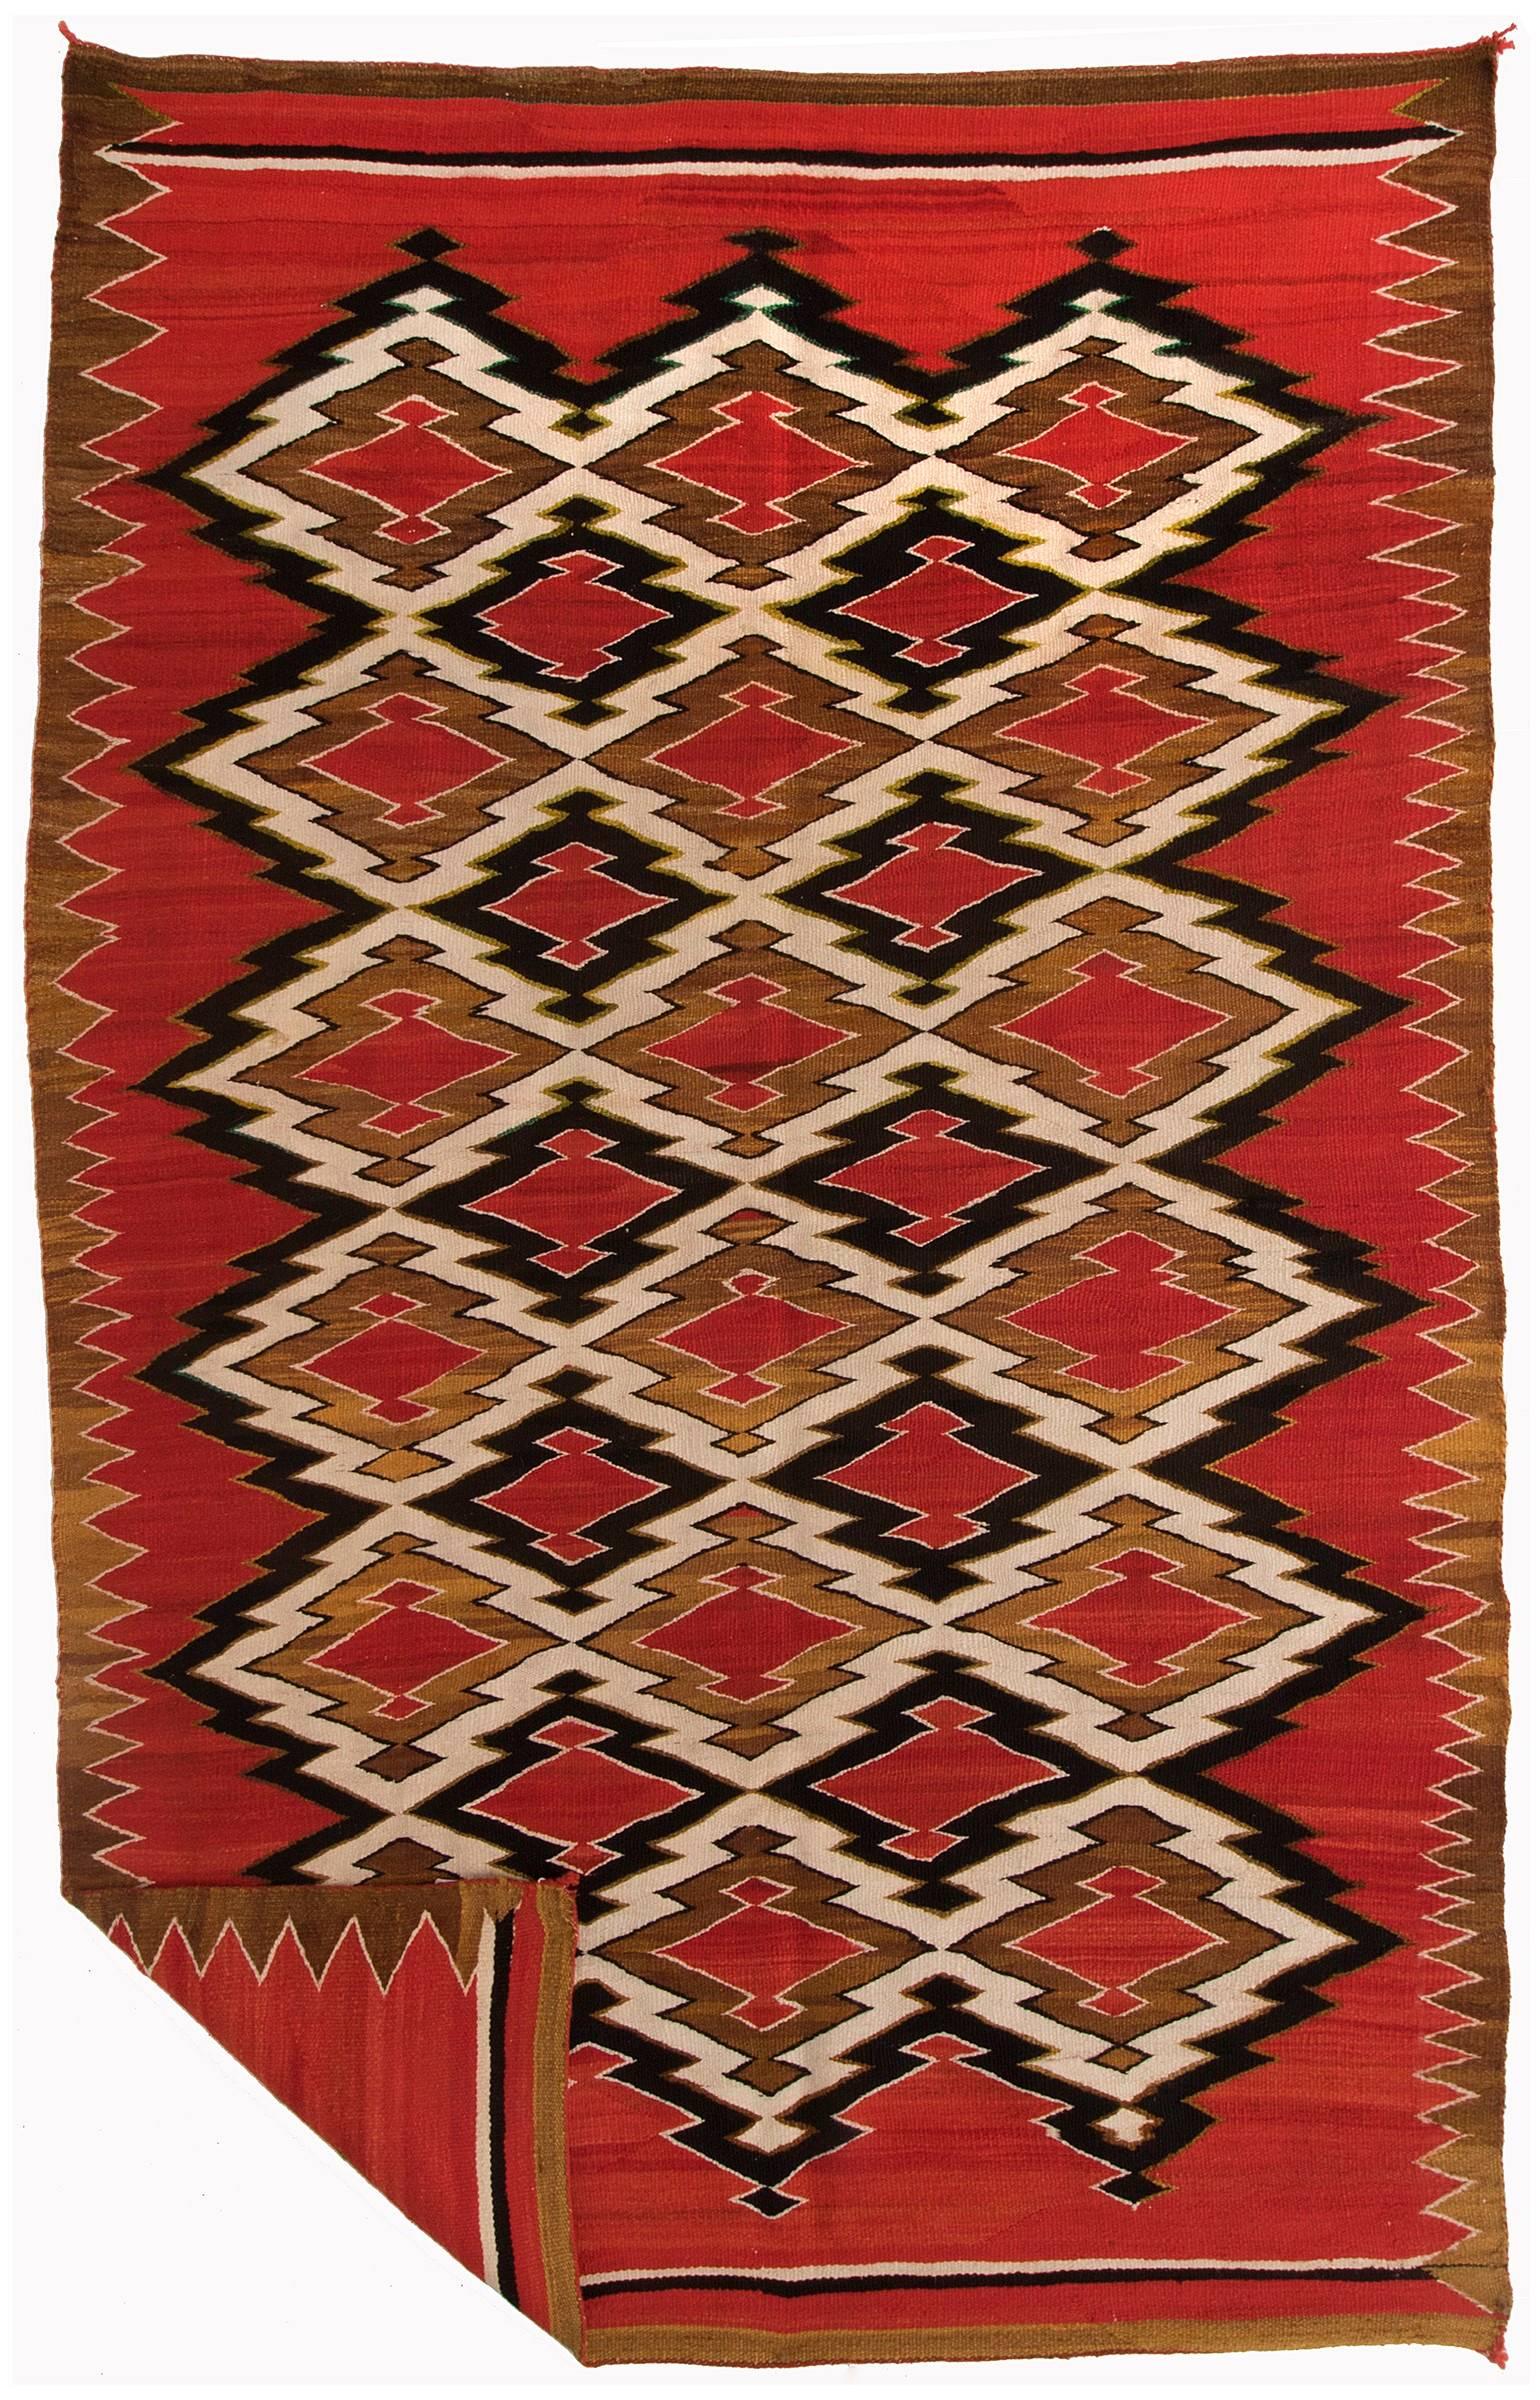 Woven of native hand-spun wool with natural fleece colors of ivory, brown and black. Aniline dyes were used to achieve the red color.

This textile is well suited for use as a wall hanging, coverlet or furniture throw.